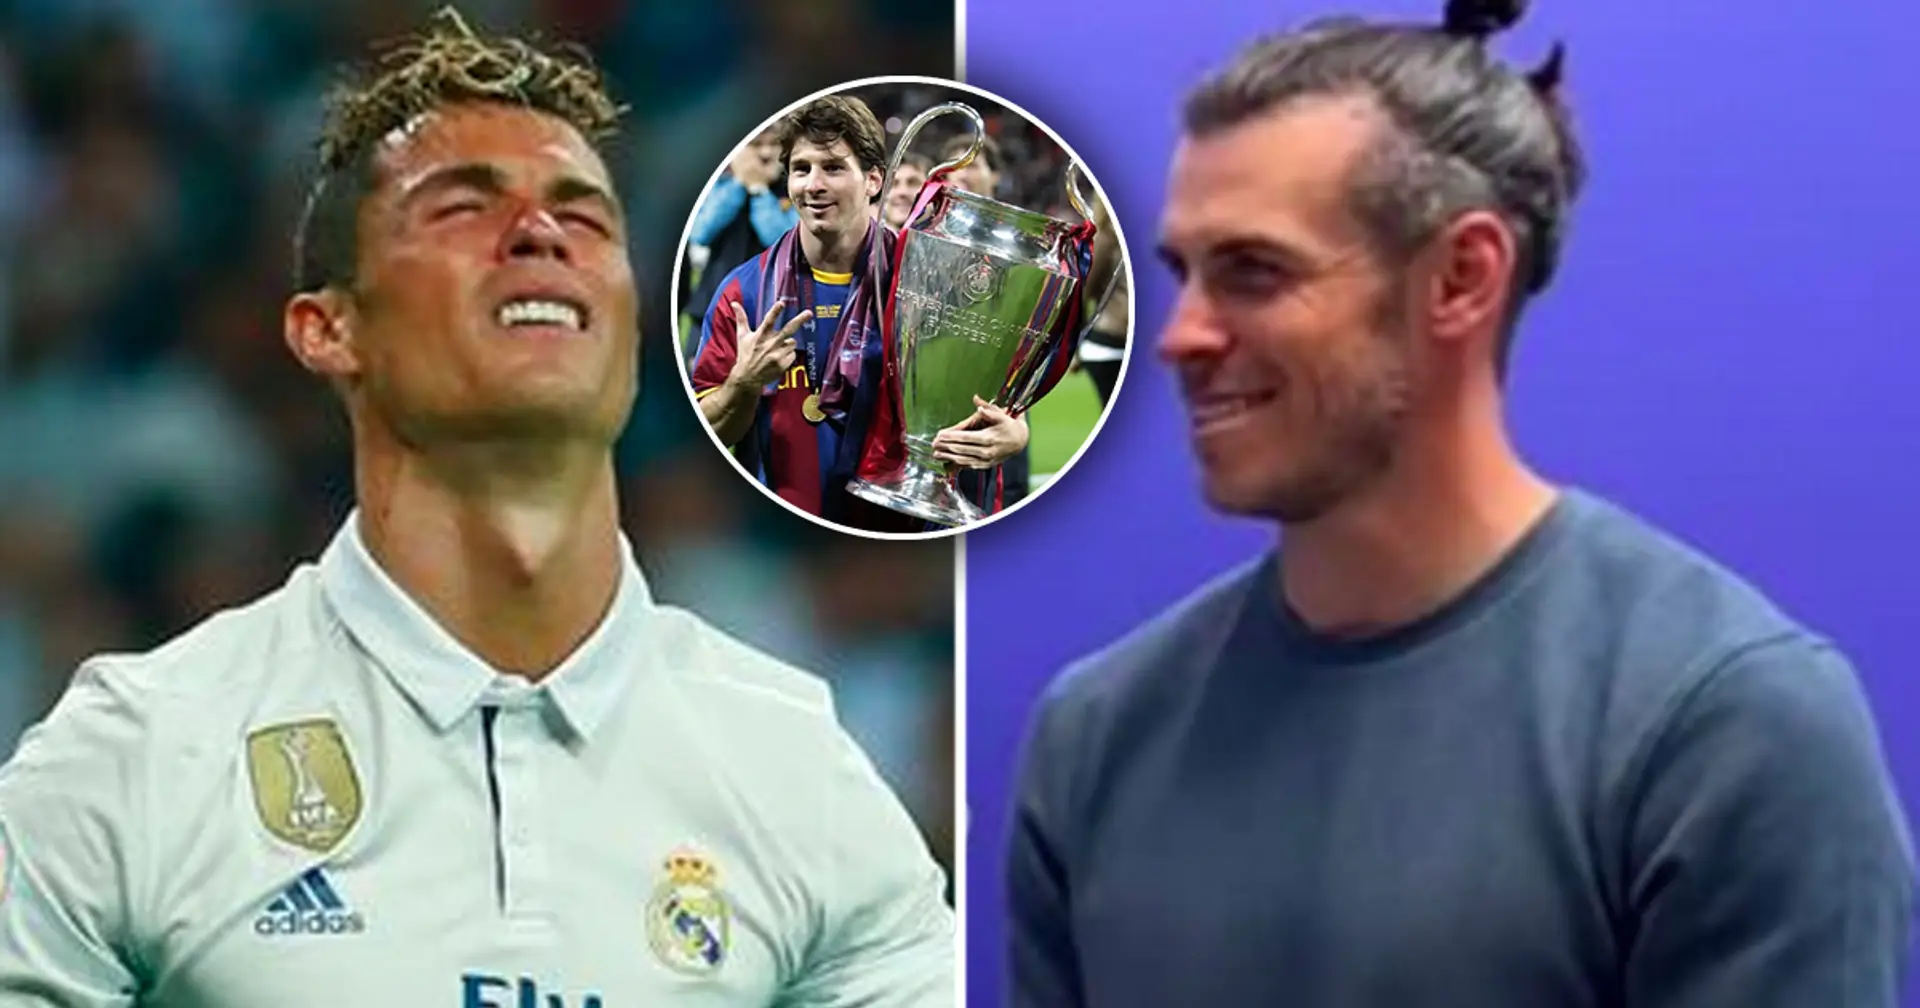 Gareth Bale bodies Cristiano Ronaldo TWICE as he picks Messi instead in two big questions